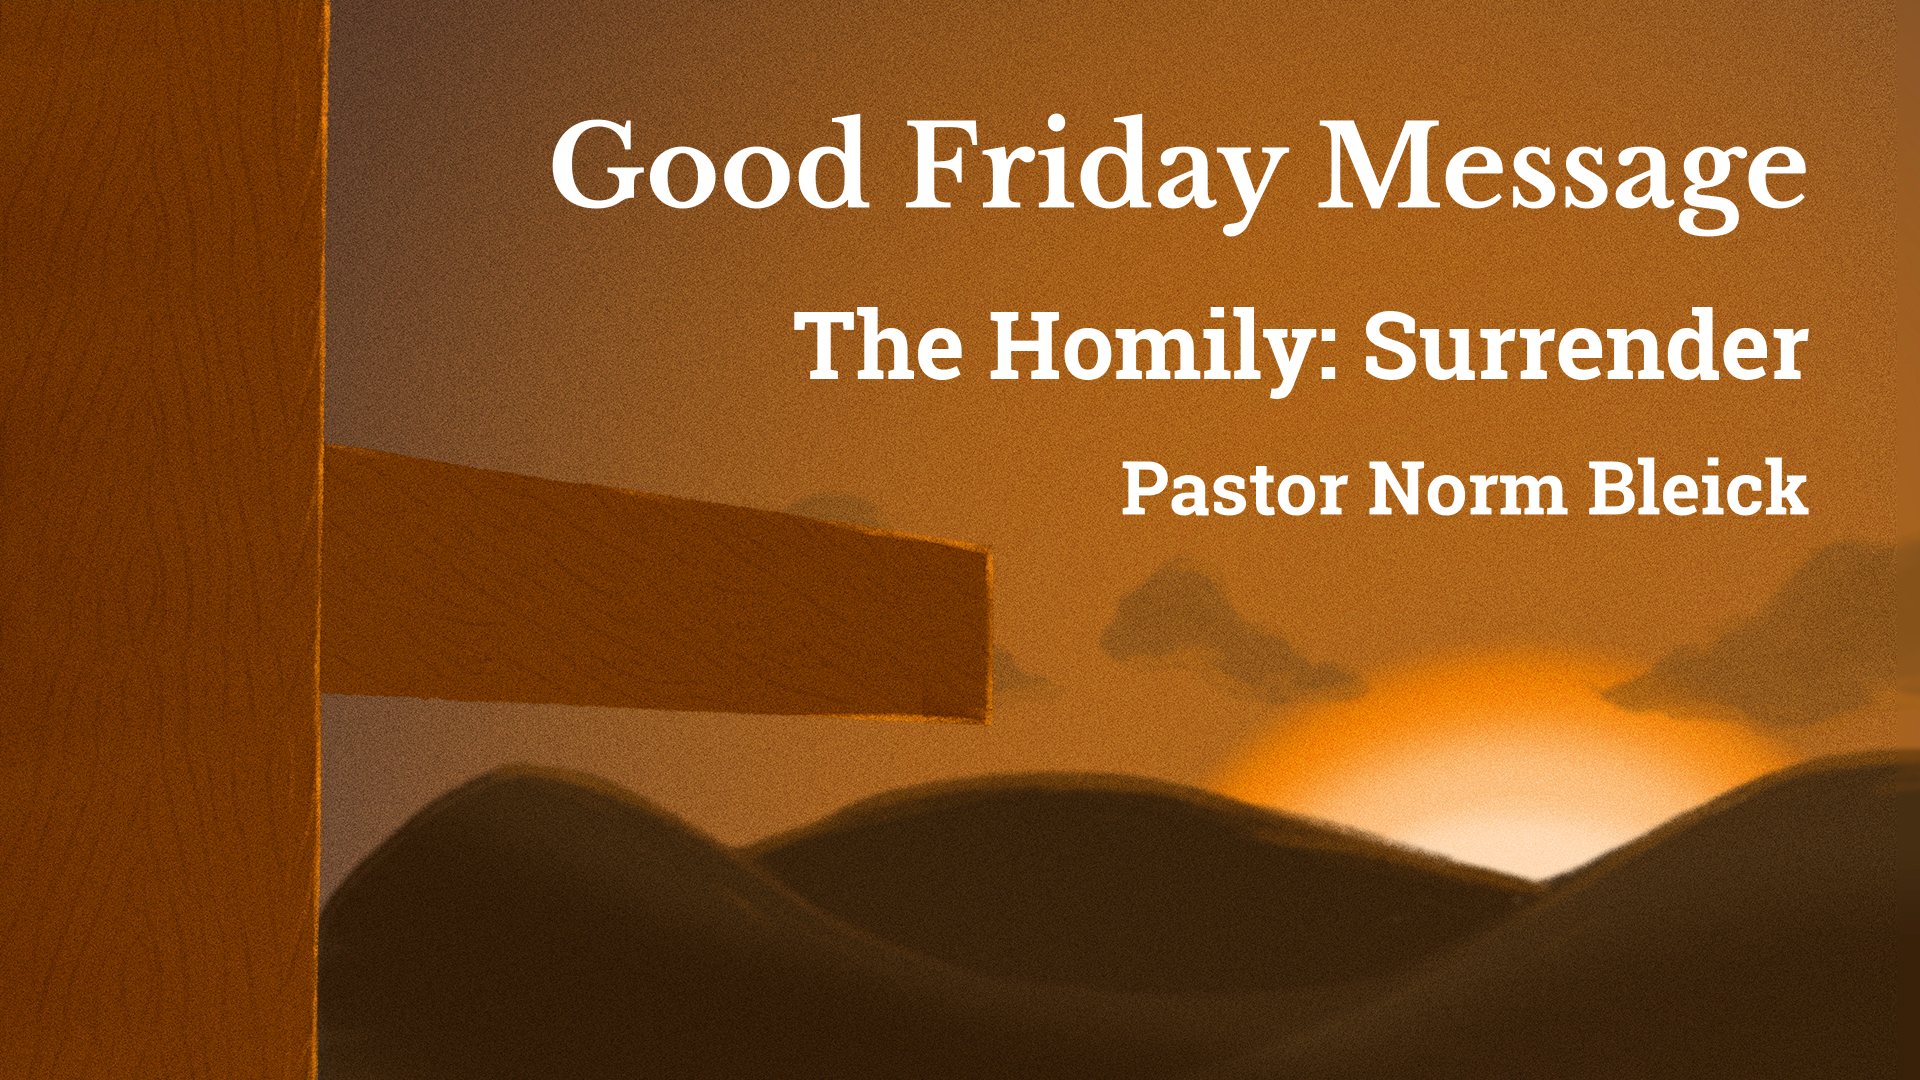 The Homily: Surrender